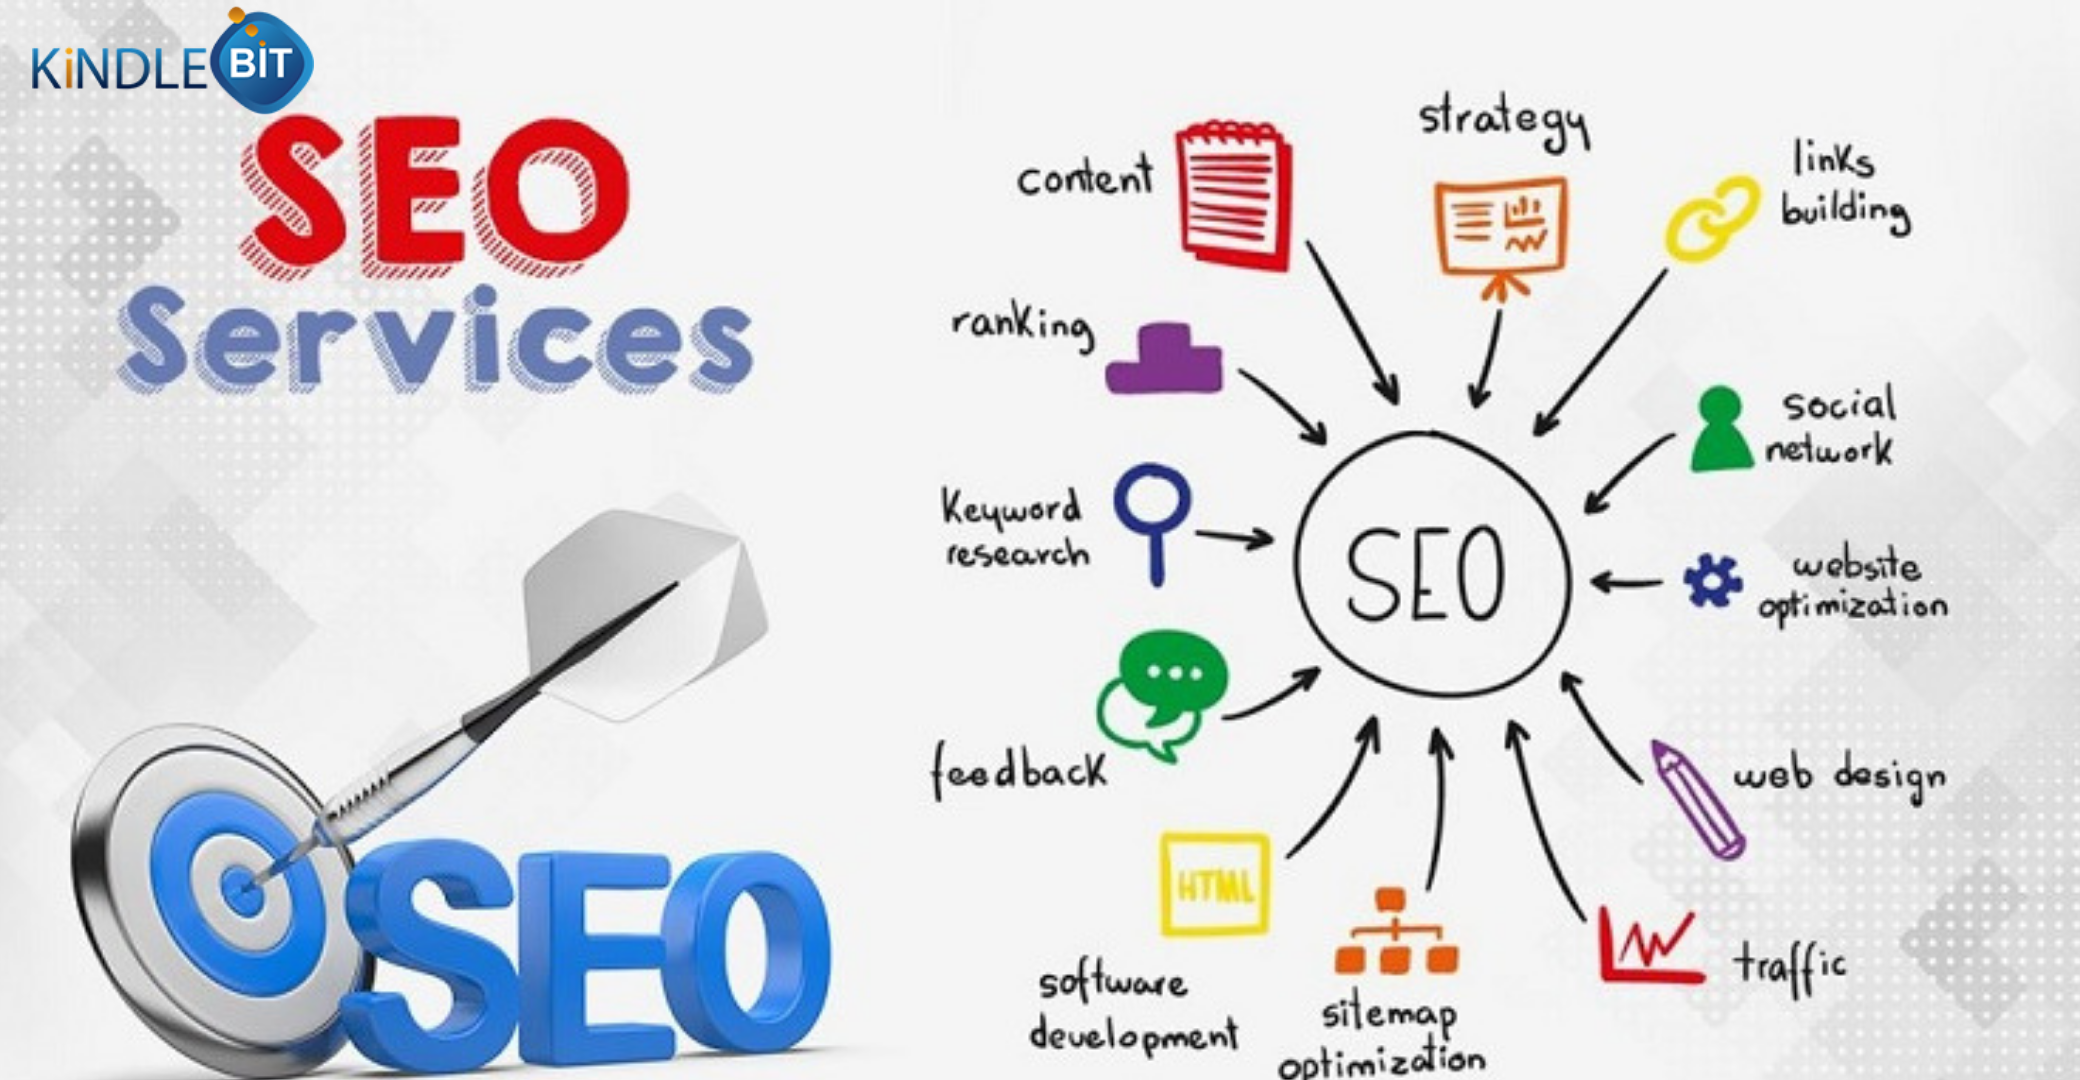 SEO Services- What are Those and What Includes those Services? | kindlebititsolution